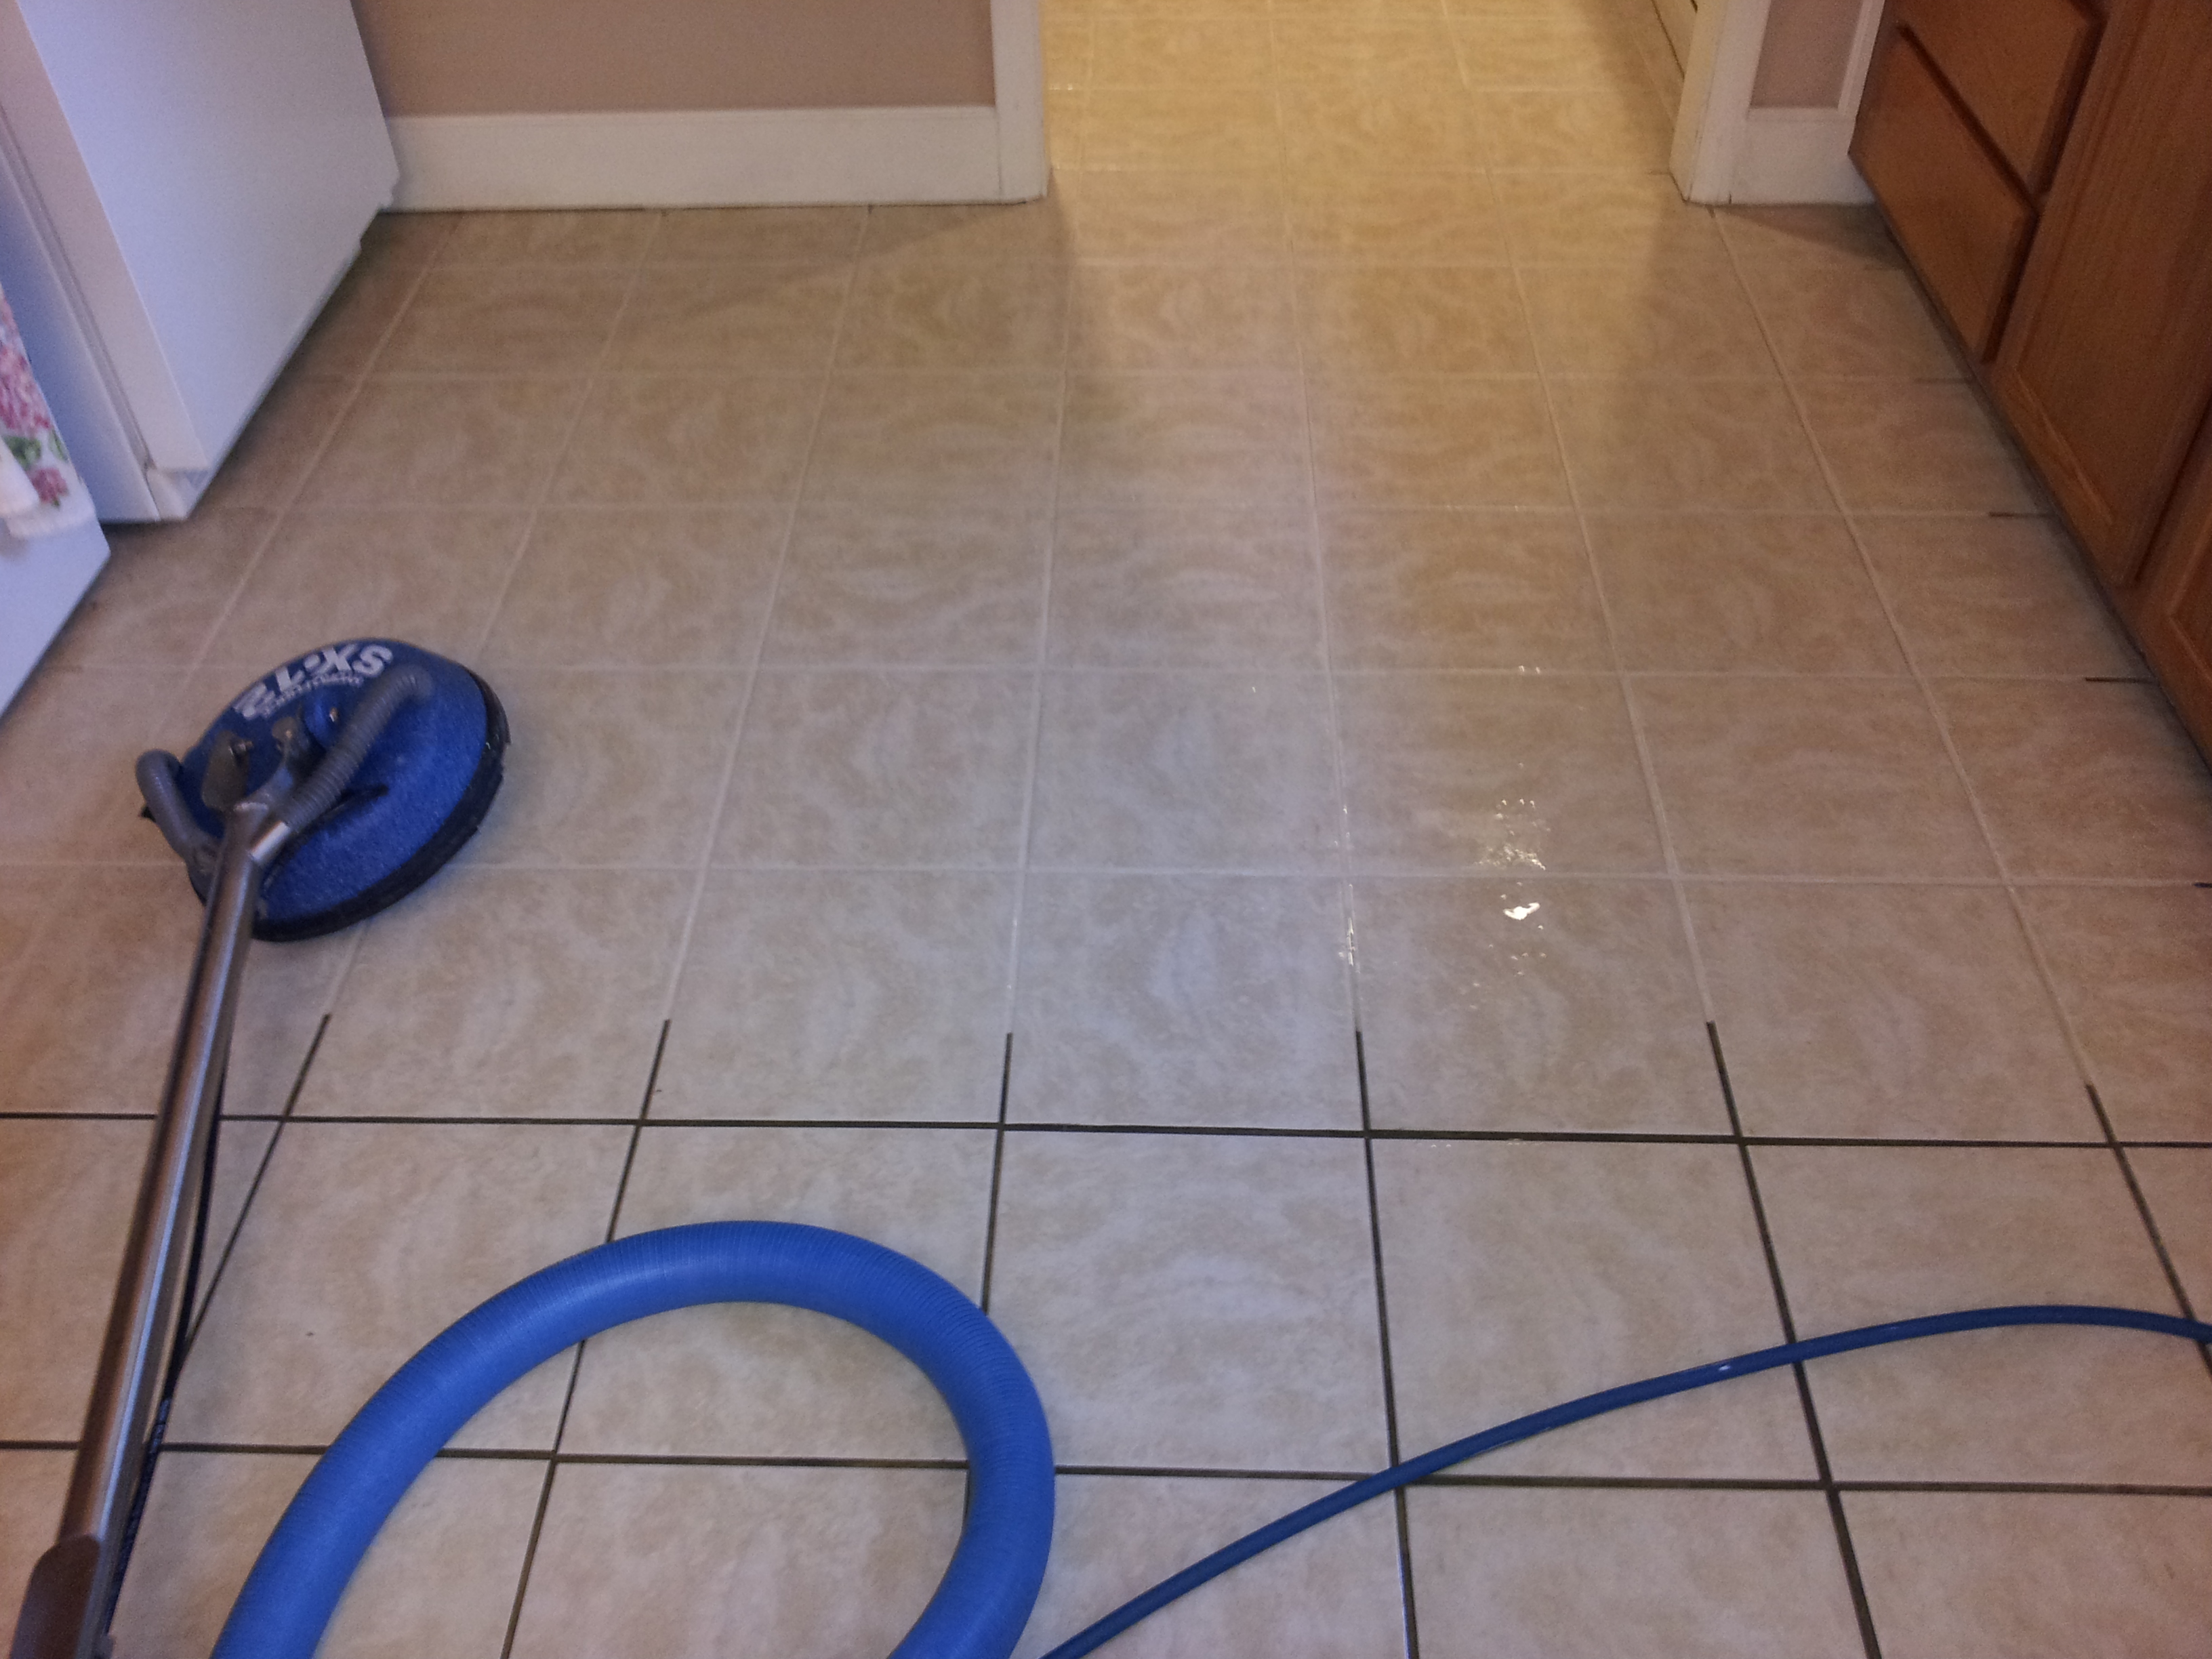 Tile Grout Cleaning, How To Clean Grout On Floor Tile